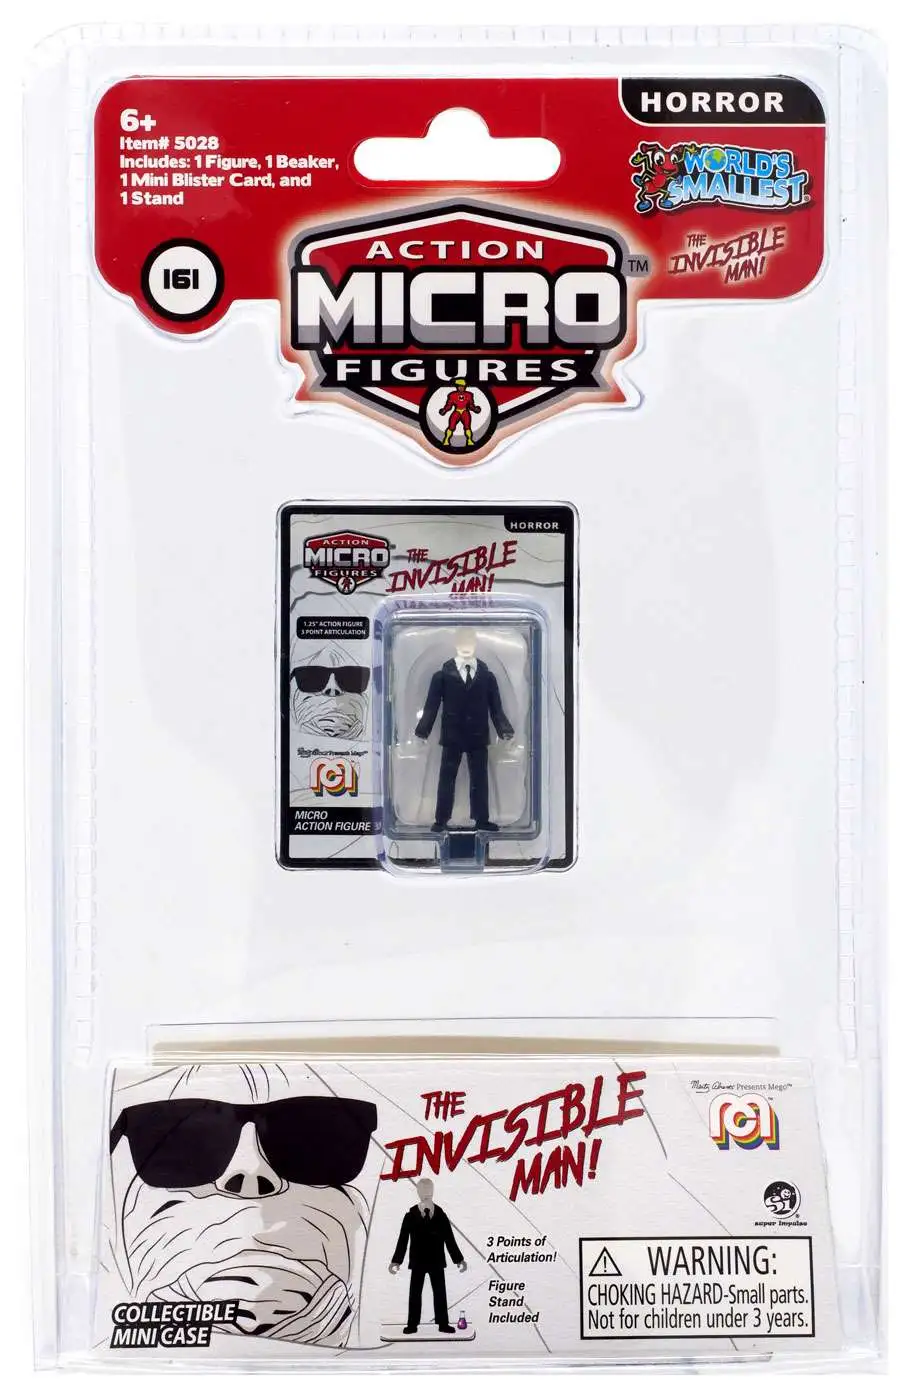 World's Smallest Mego Action Micro Figures The Invisible Man 1.25-Inch Micro Figure